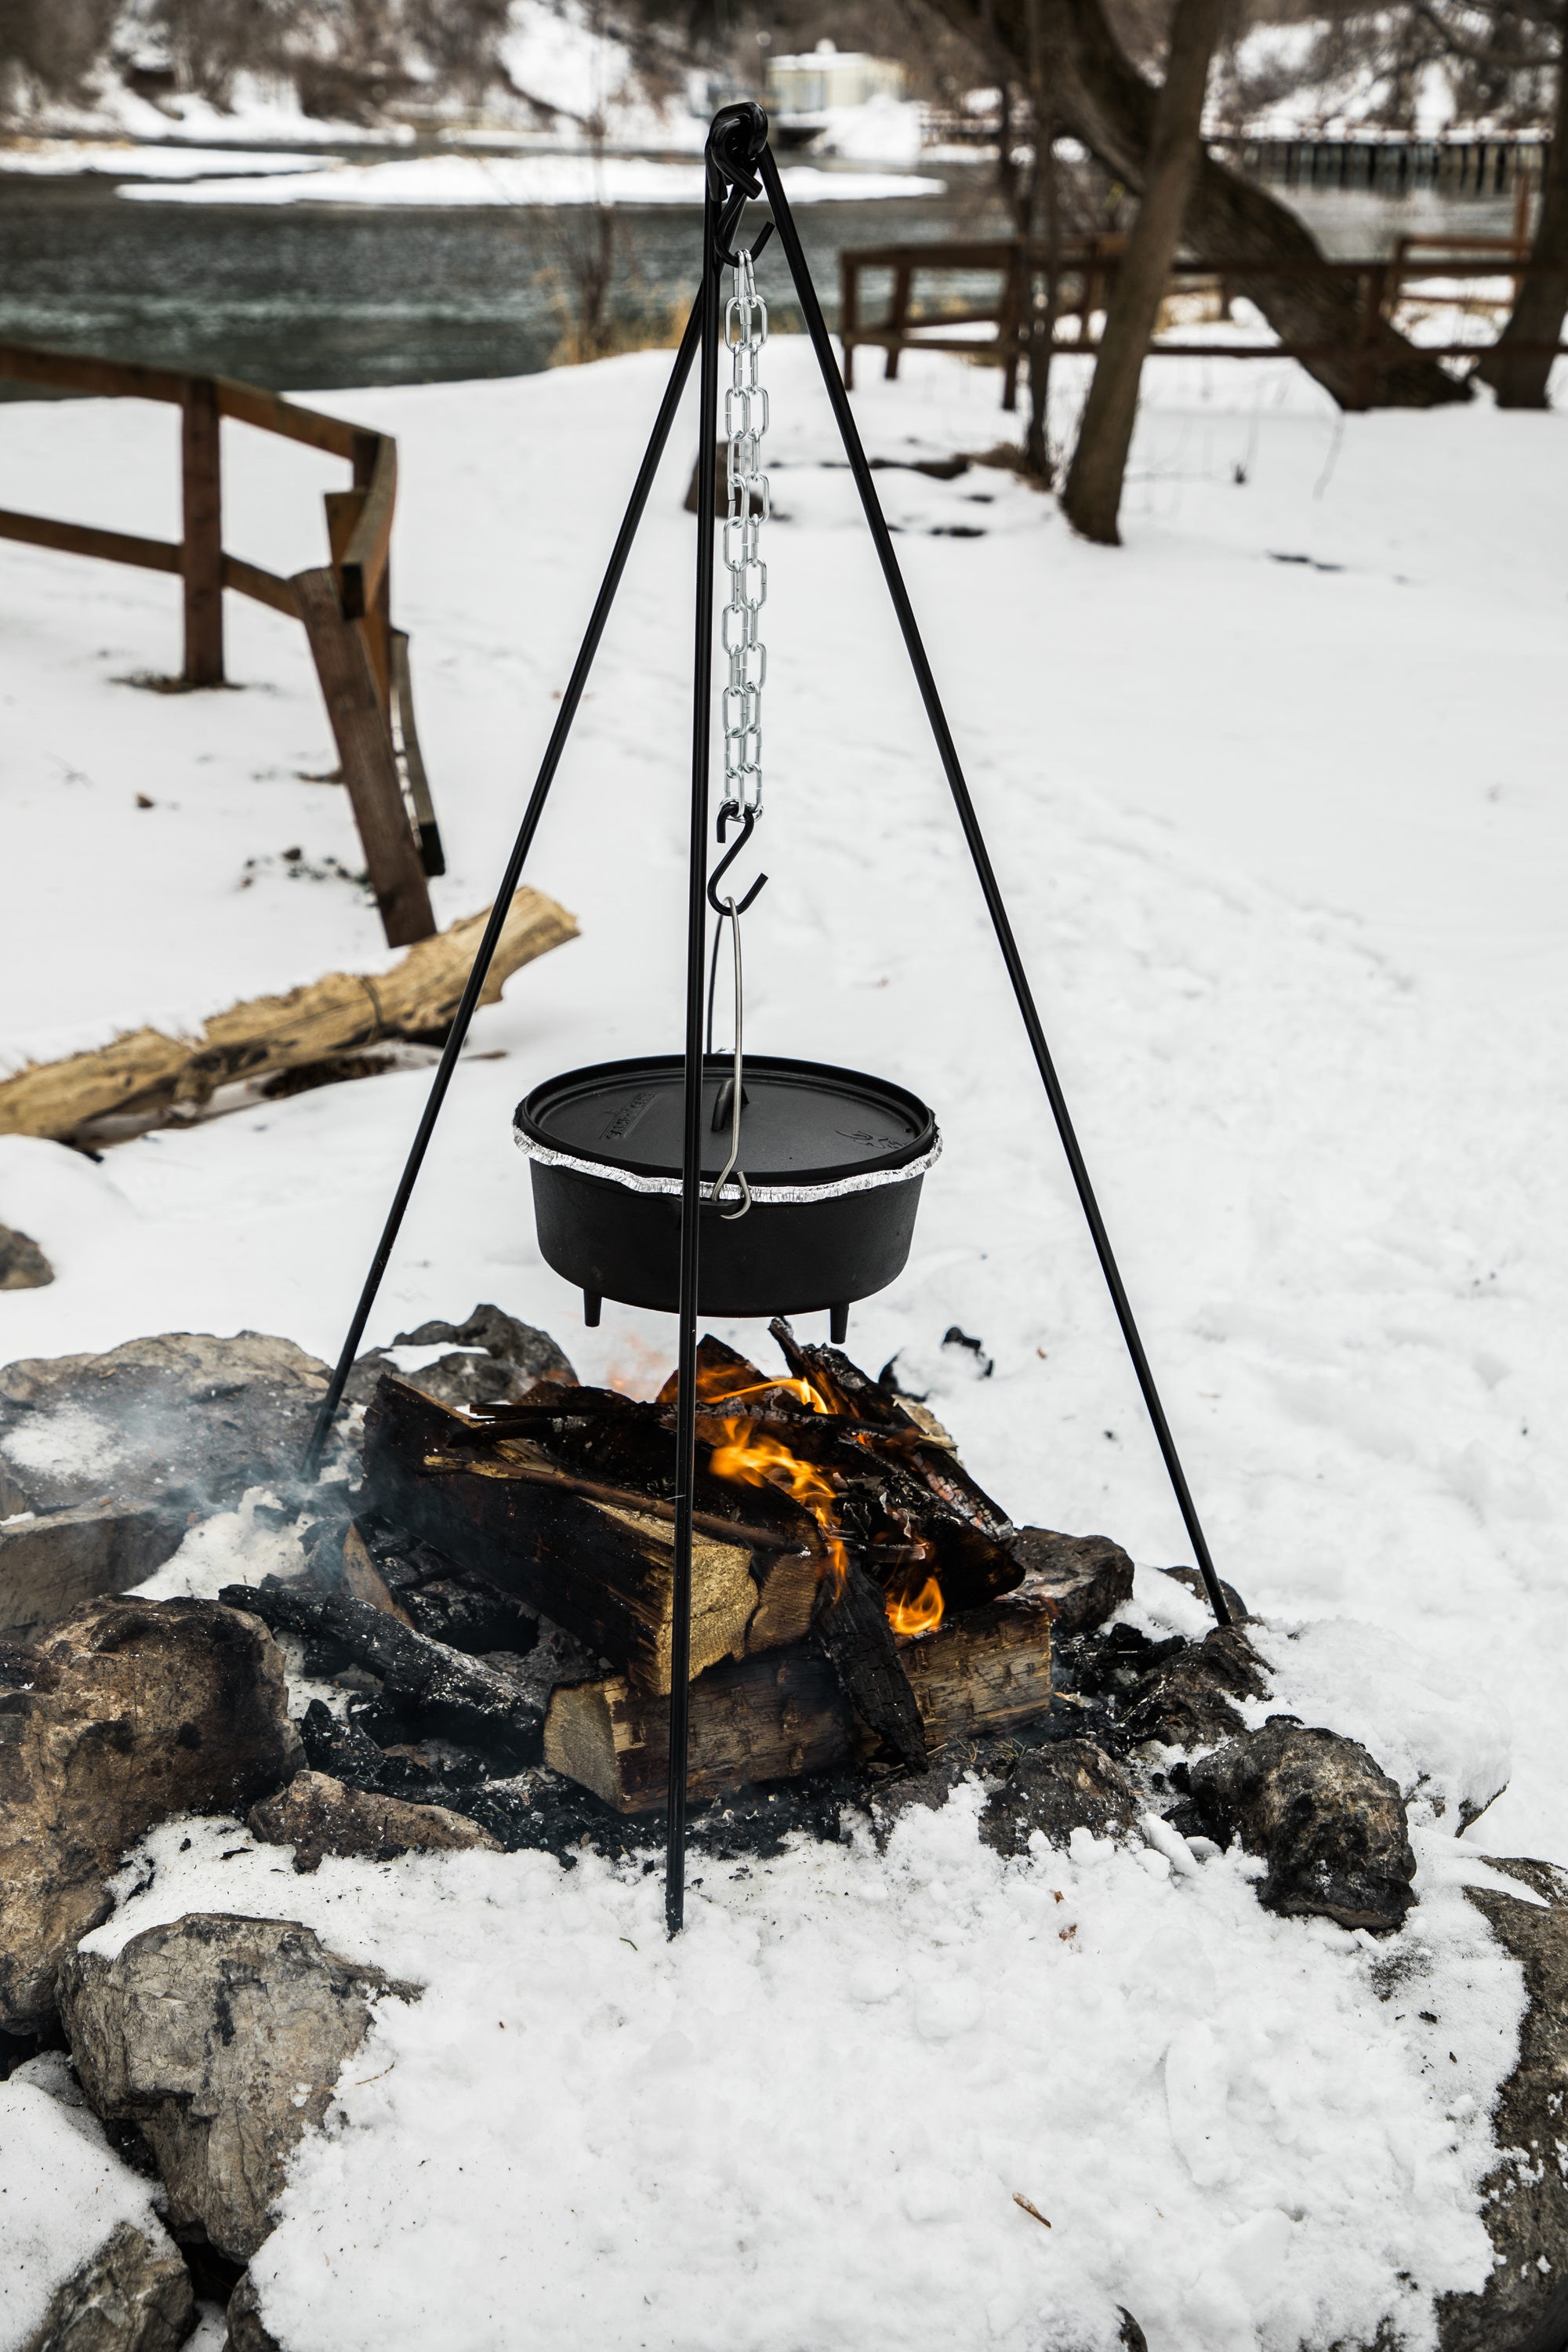 Camp Chef Dutch Oven Cast Iron Campfire Cook Stand in the Cooking